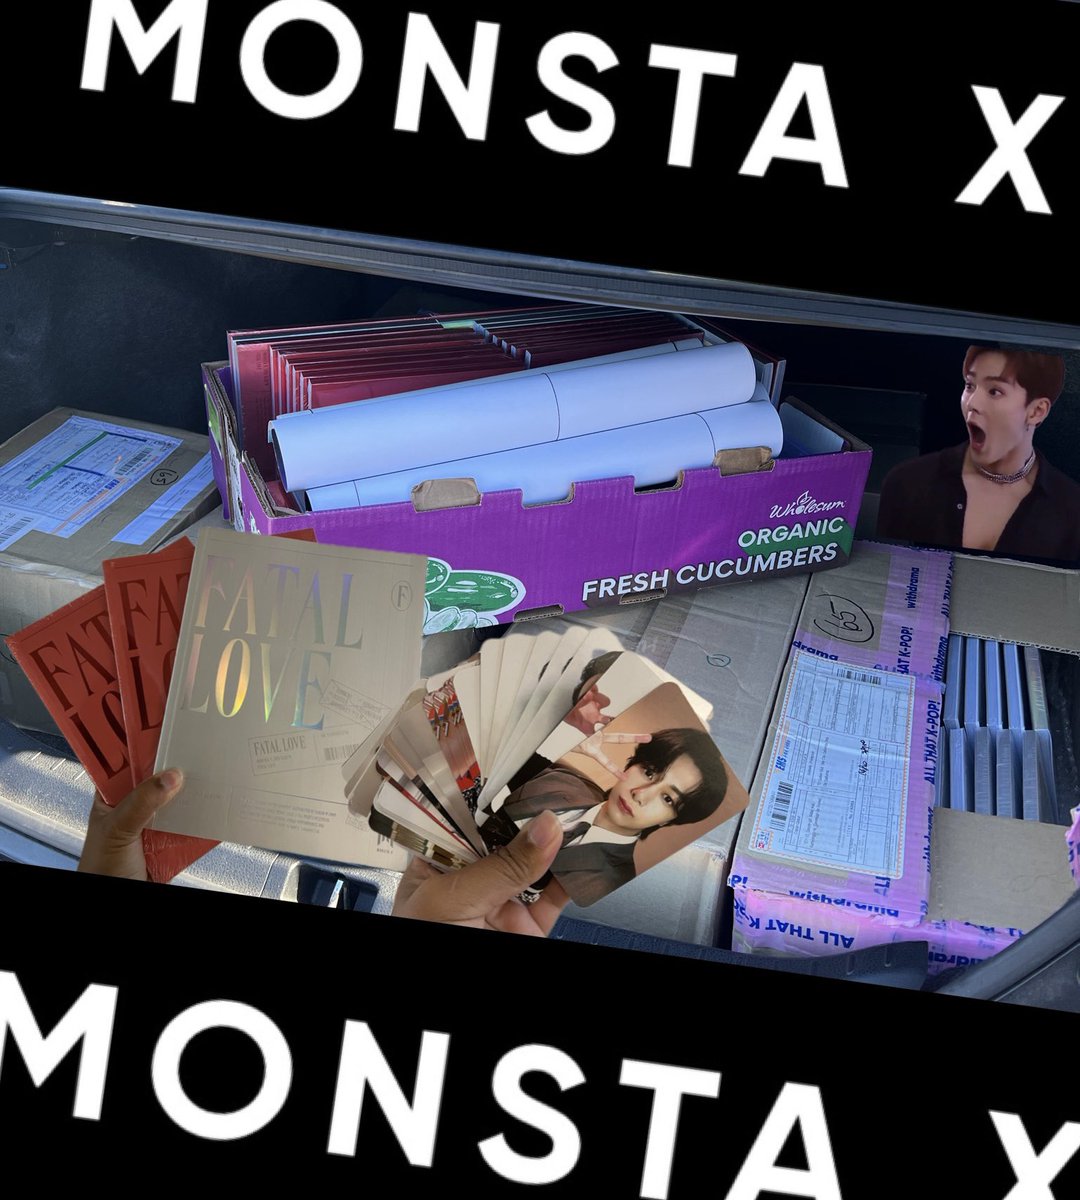 MONBEBE in LA!

So uh, the back of my car is packed with albums, PCs & posters (it’s not even all of it in the photo 😂)to be given away for FREE @ the Forum before the concert on 6/11 

More info to come. Pls spread the word~

#MONSTA_X #MONSTAX
#NOLIMITUSTOUR #MONSTAXinLA